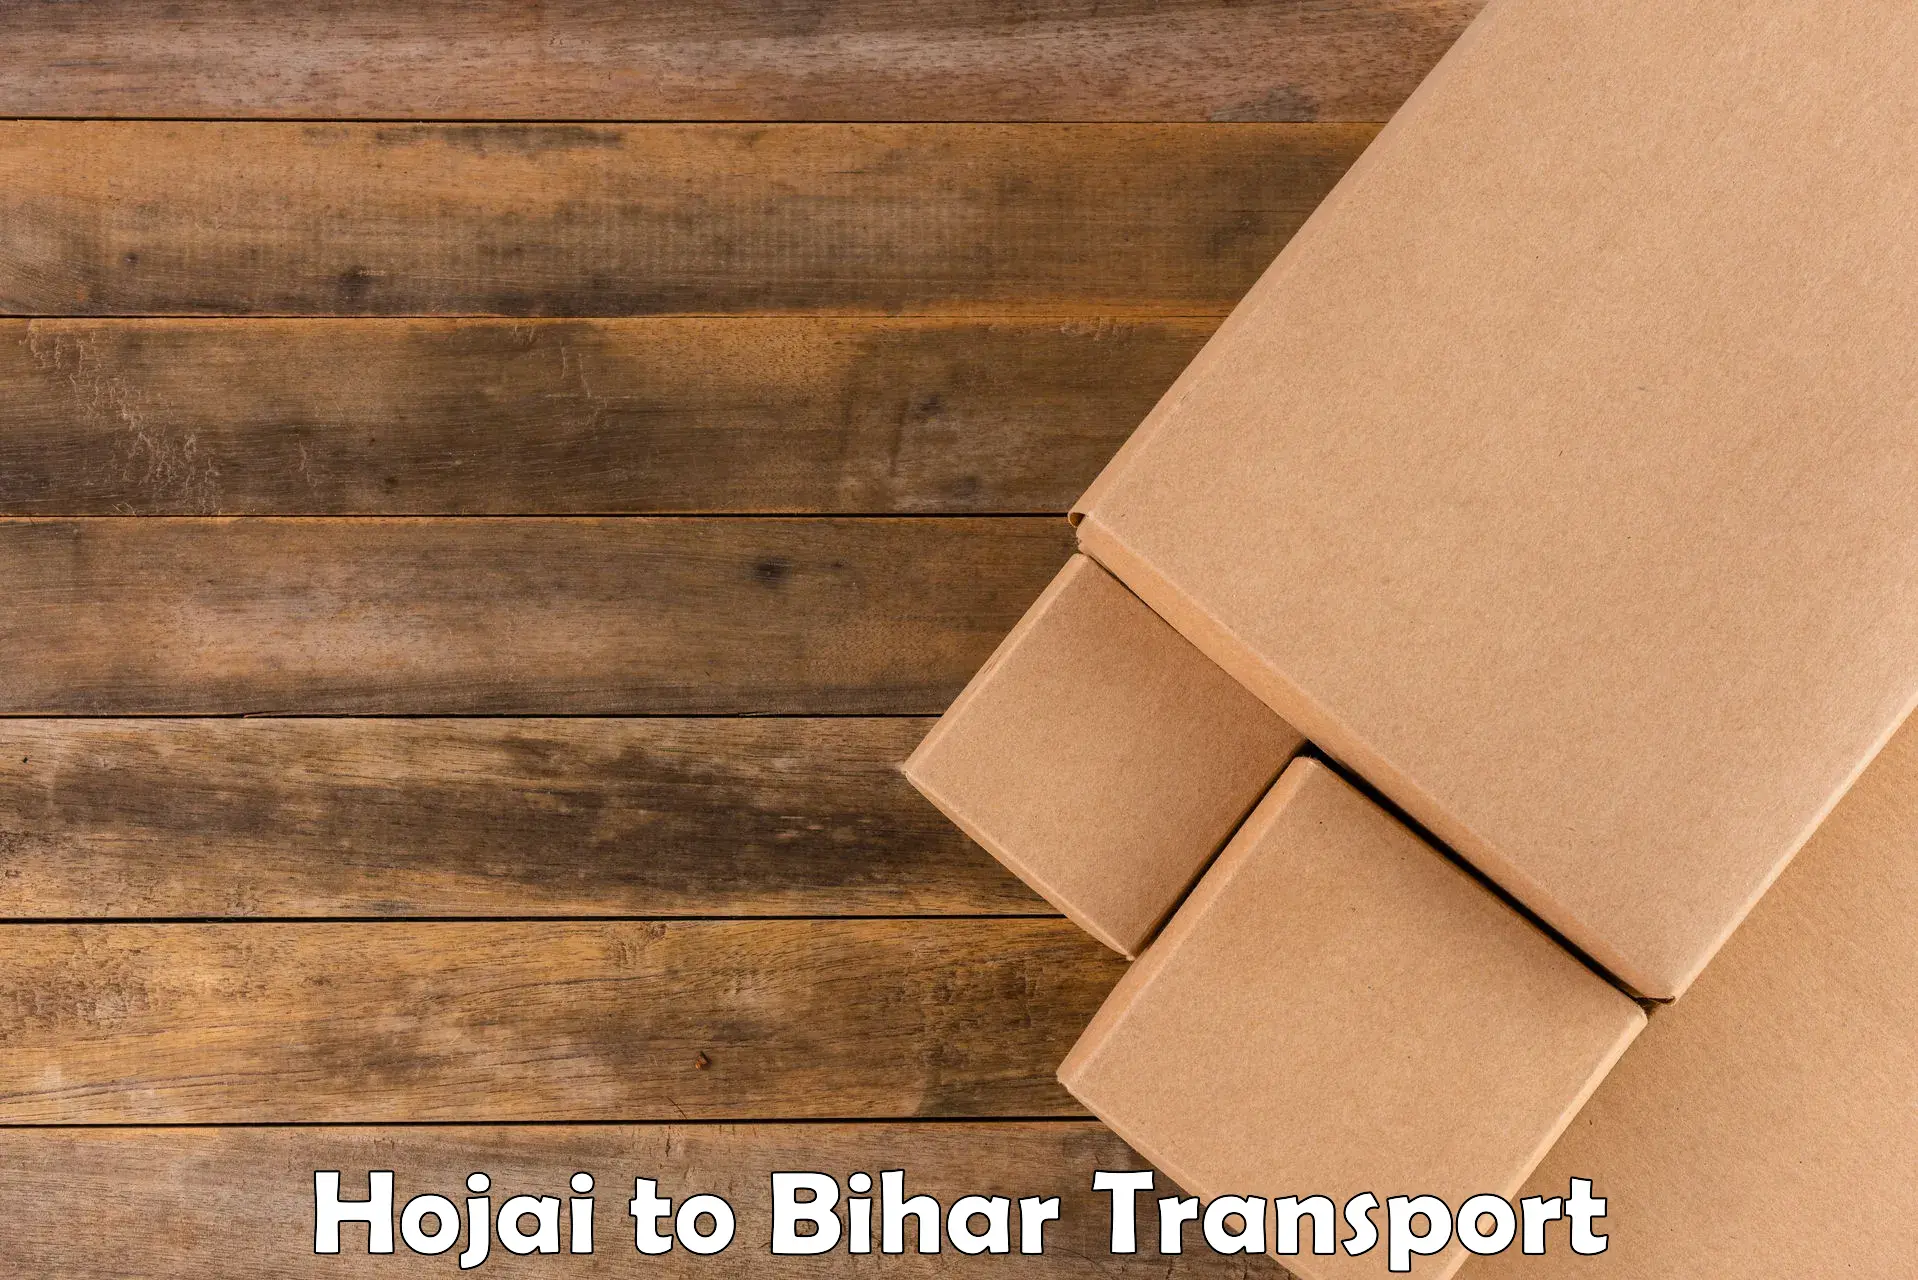 Commercial transport service Hojai to Birpur